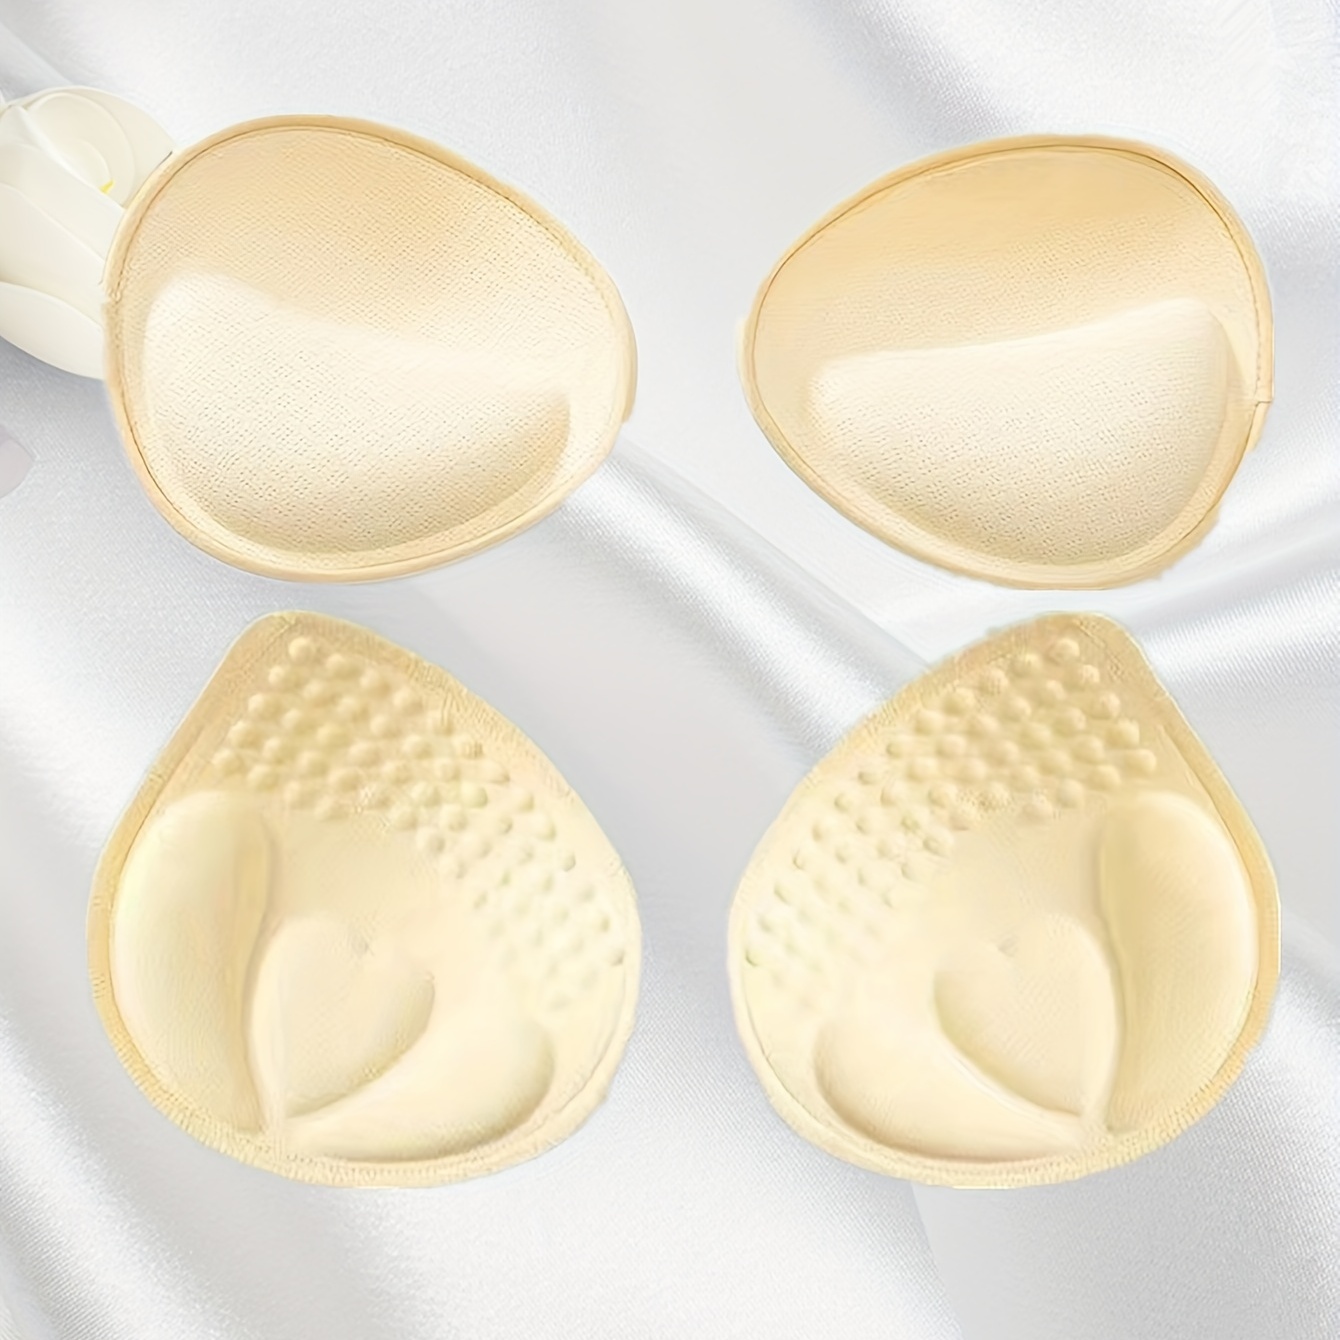 Women's Silicone Adhesive Bra Pads Breast Inserts Breathable